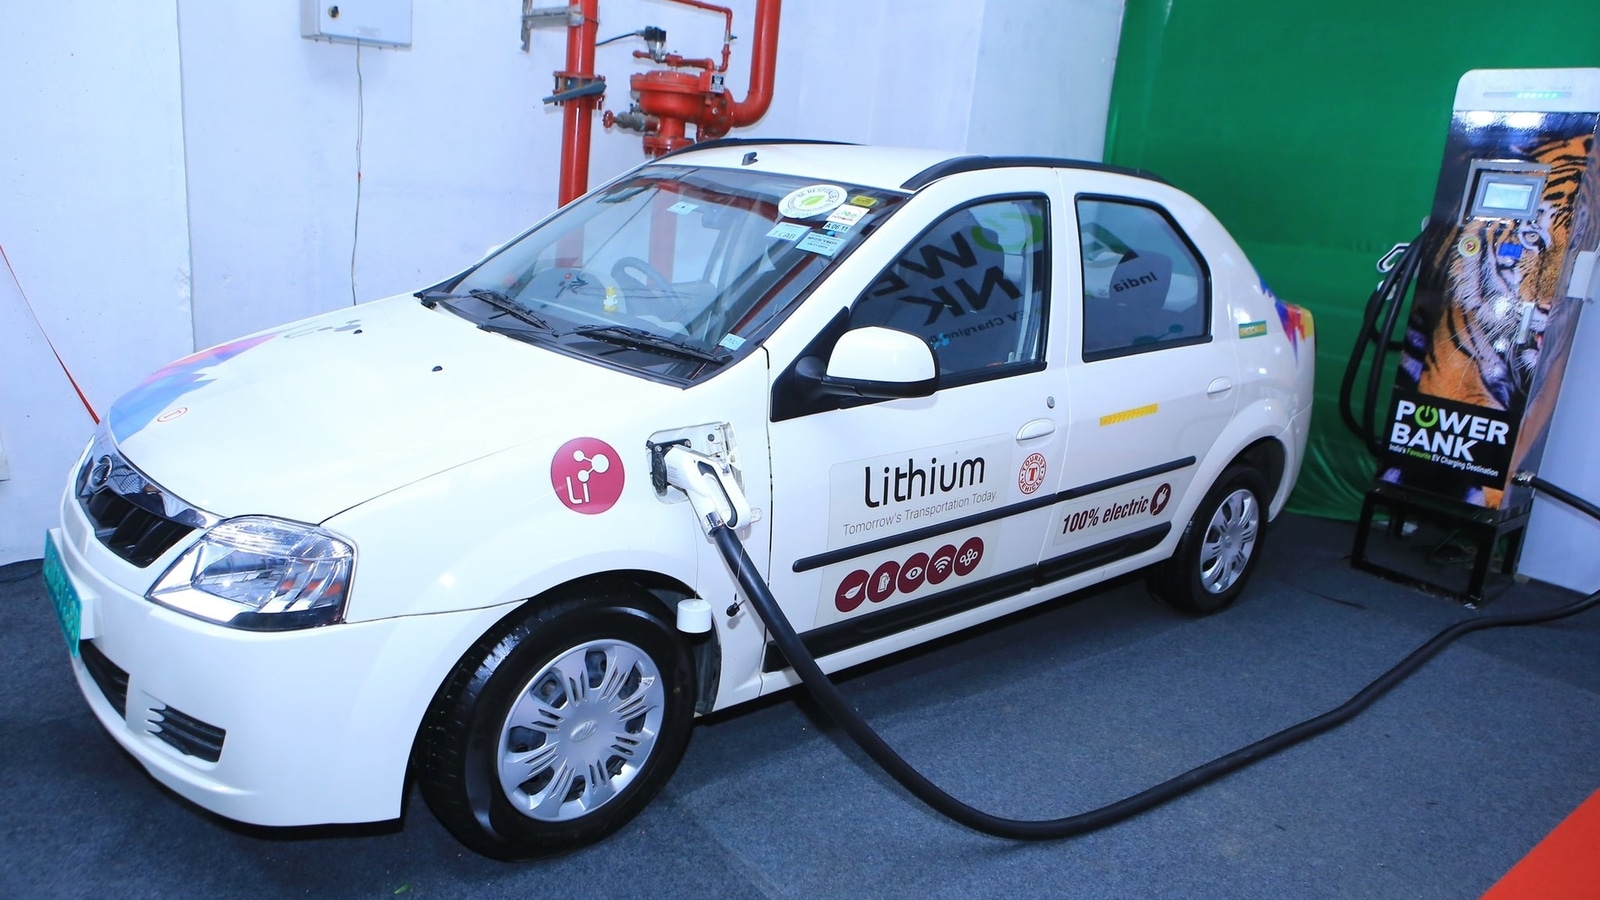 Mumbai gets first public electric vehicle charging station, minister